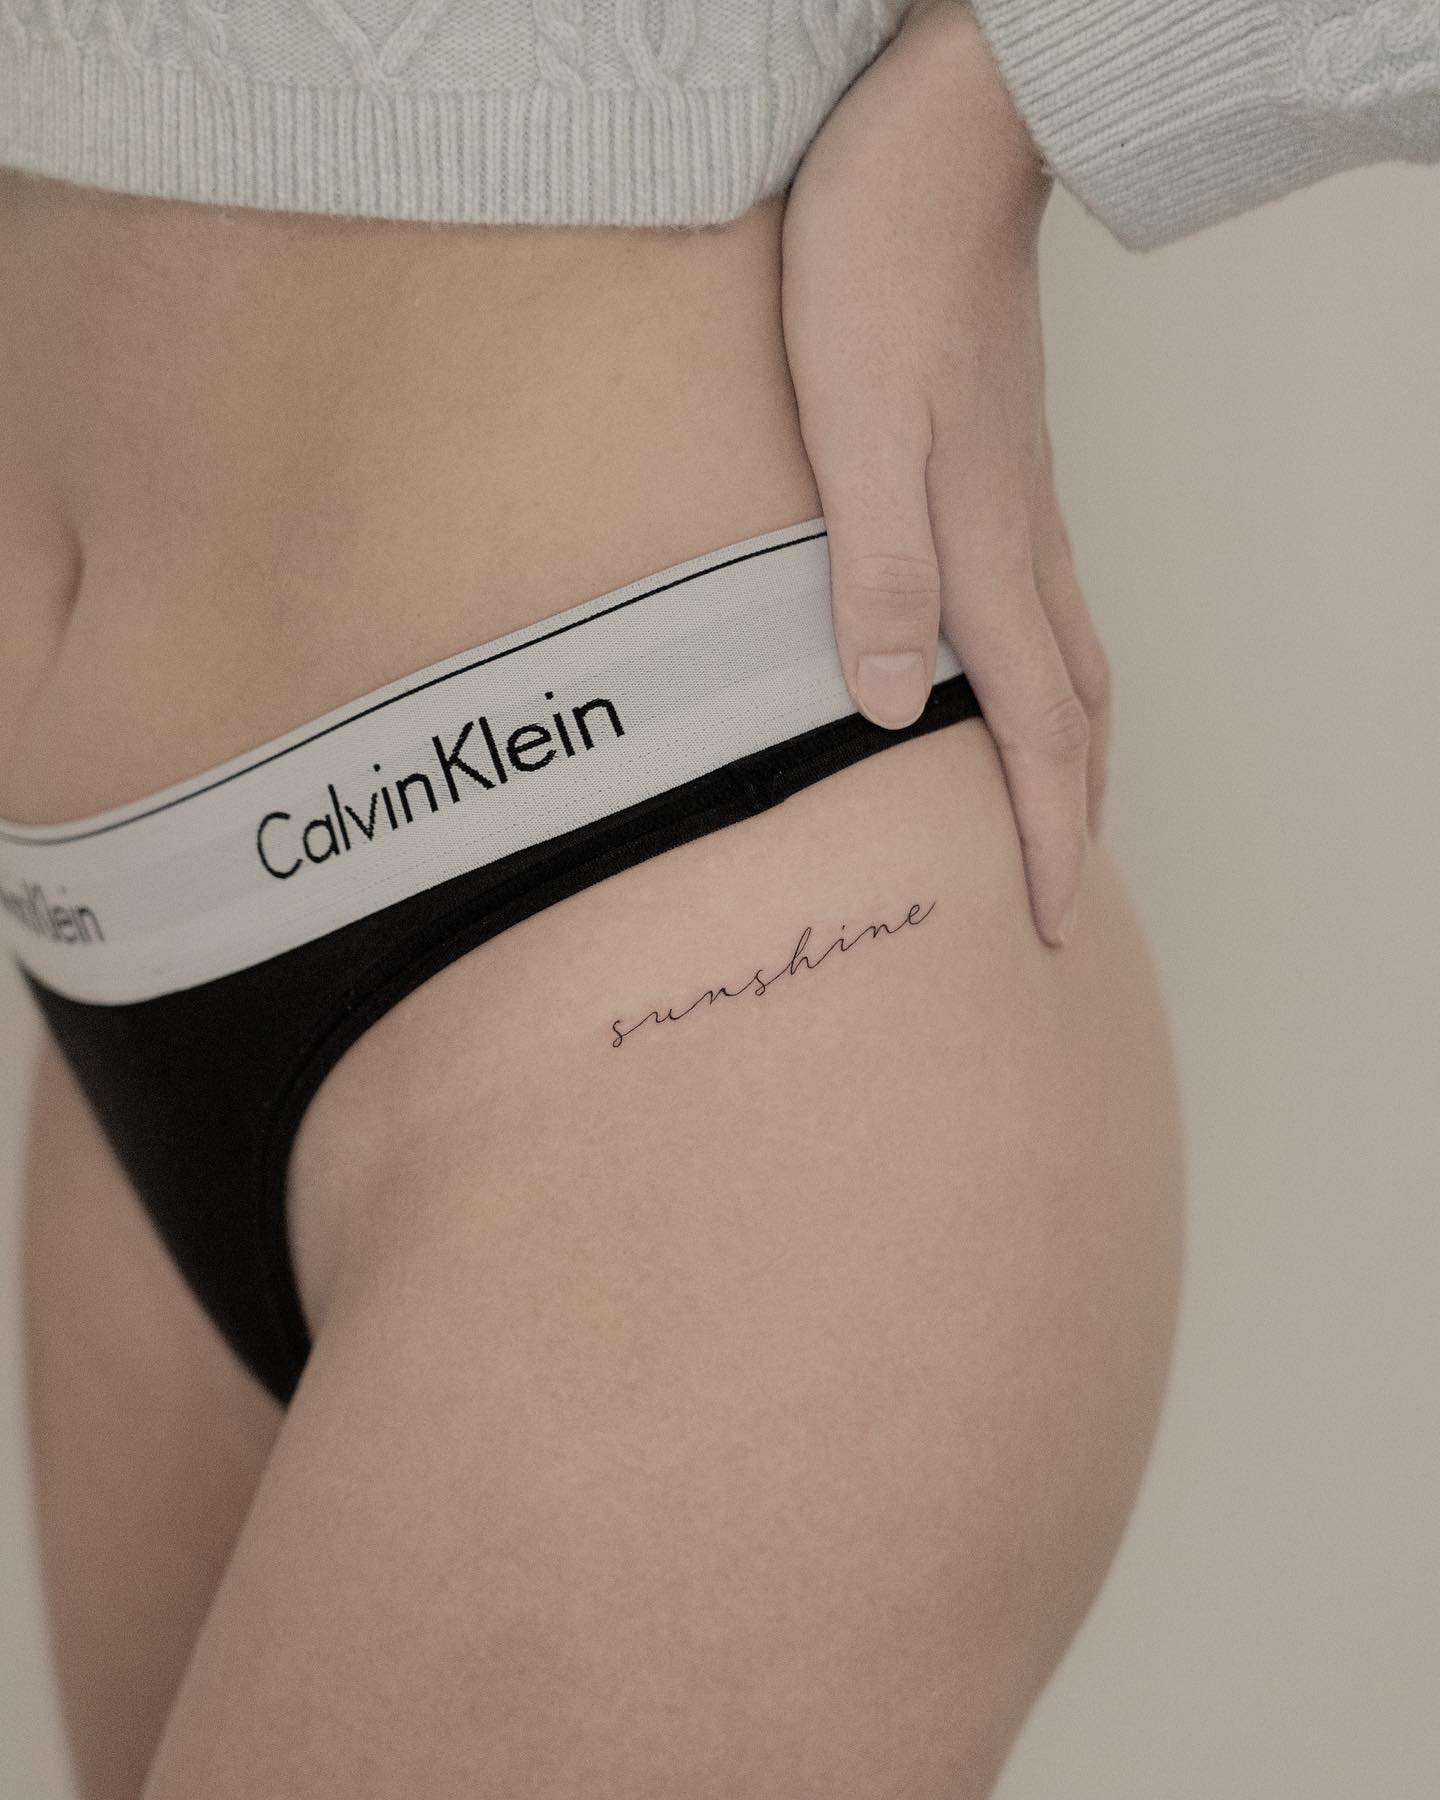 Go for just a one-word tattoo as your hip creation. Women who enjoy smaller and seamless designs plus those who are super picky with their ideas will like this concept.